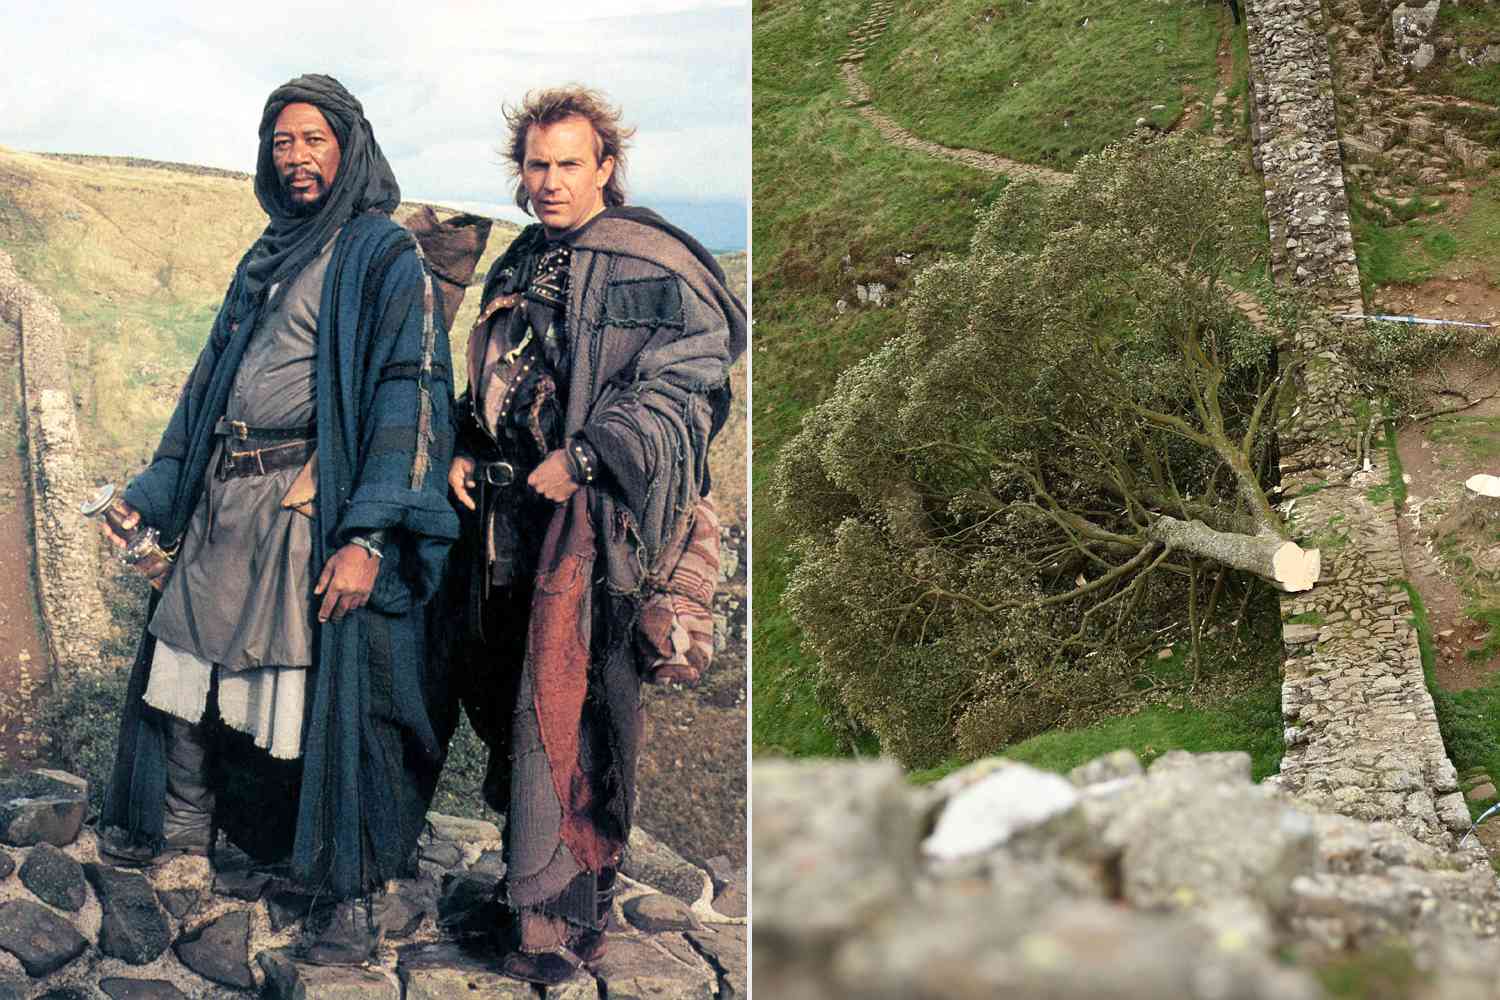 2 Men Charged with Chopping Down Iconic Sycamore Tree Featured in Kevin Costner's 'Robin Hood'